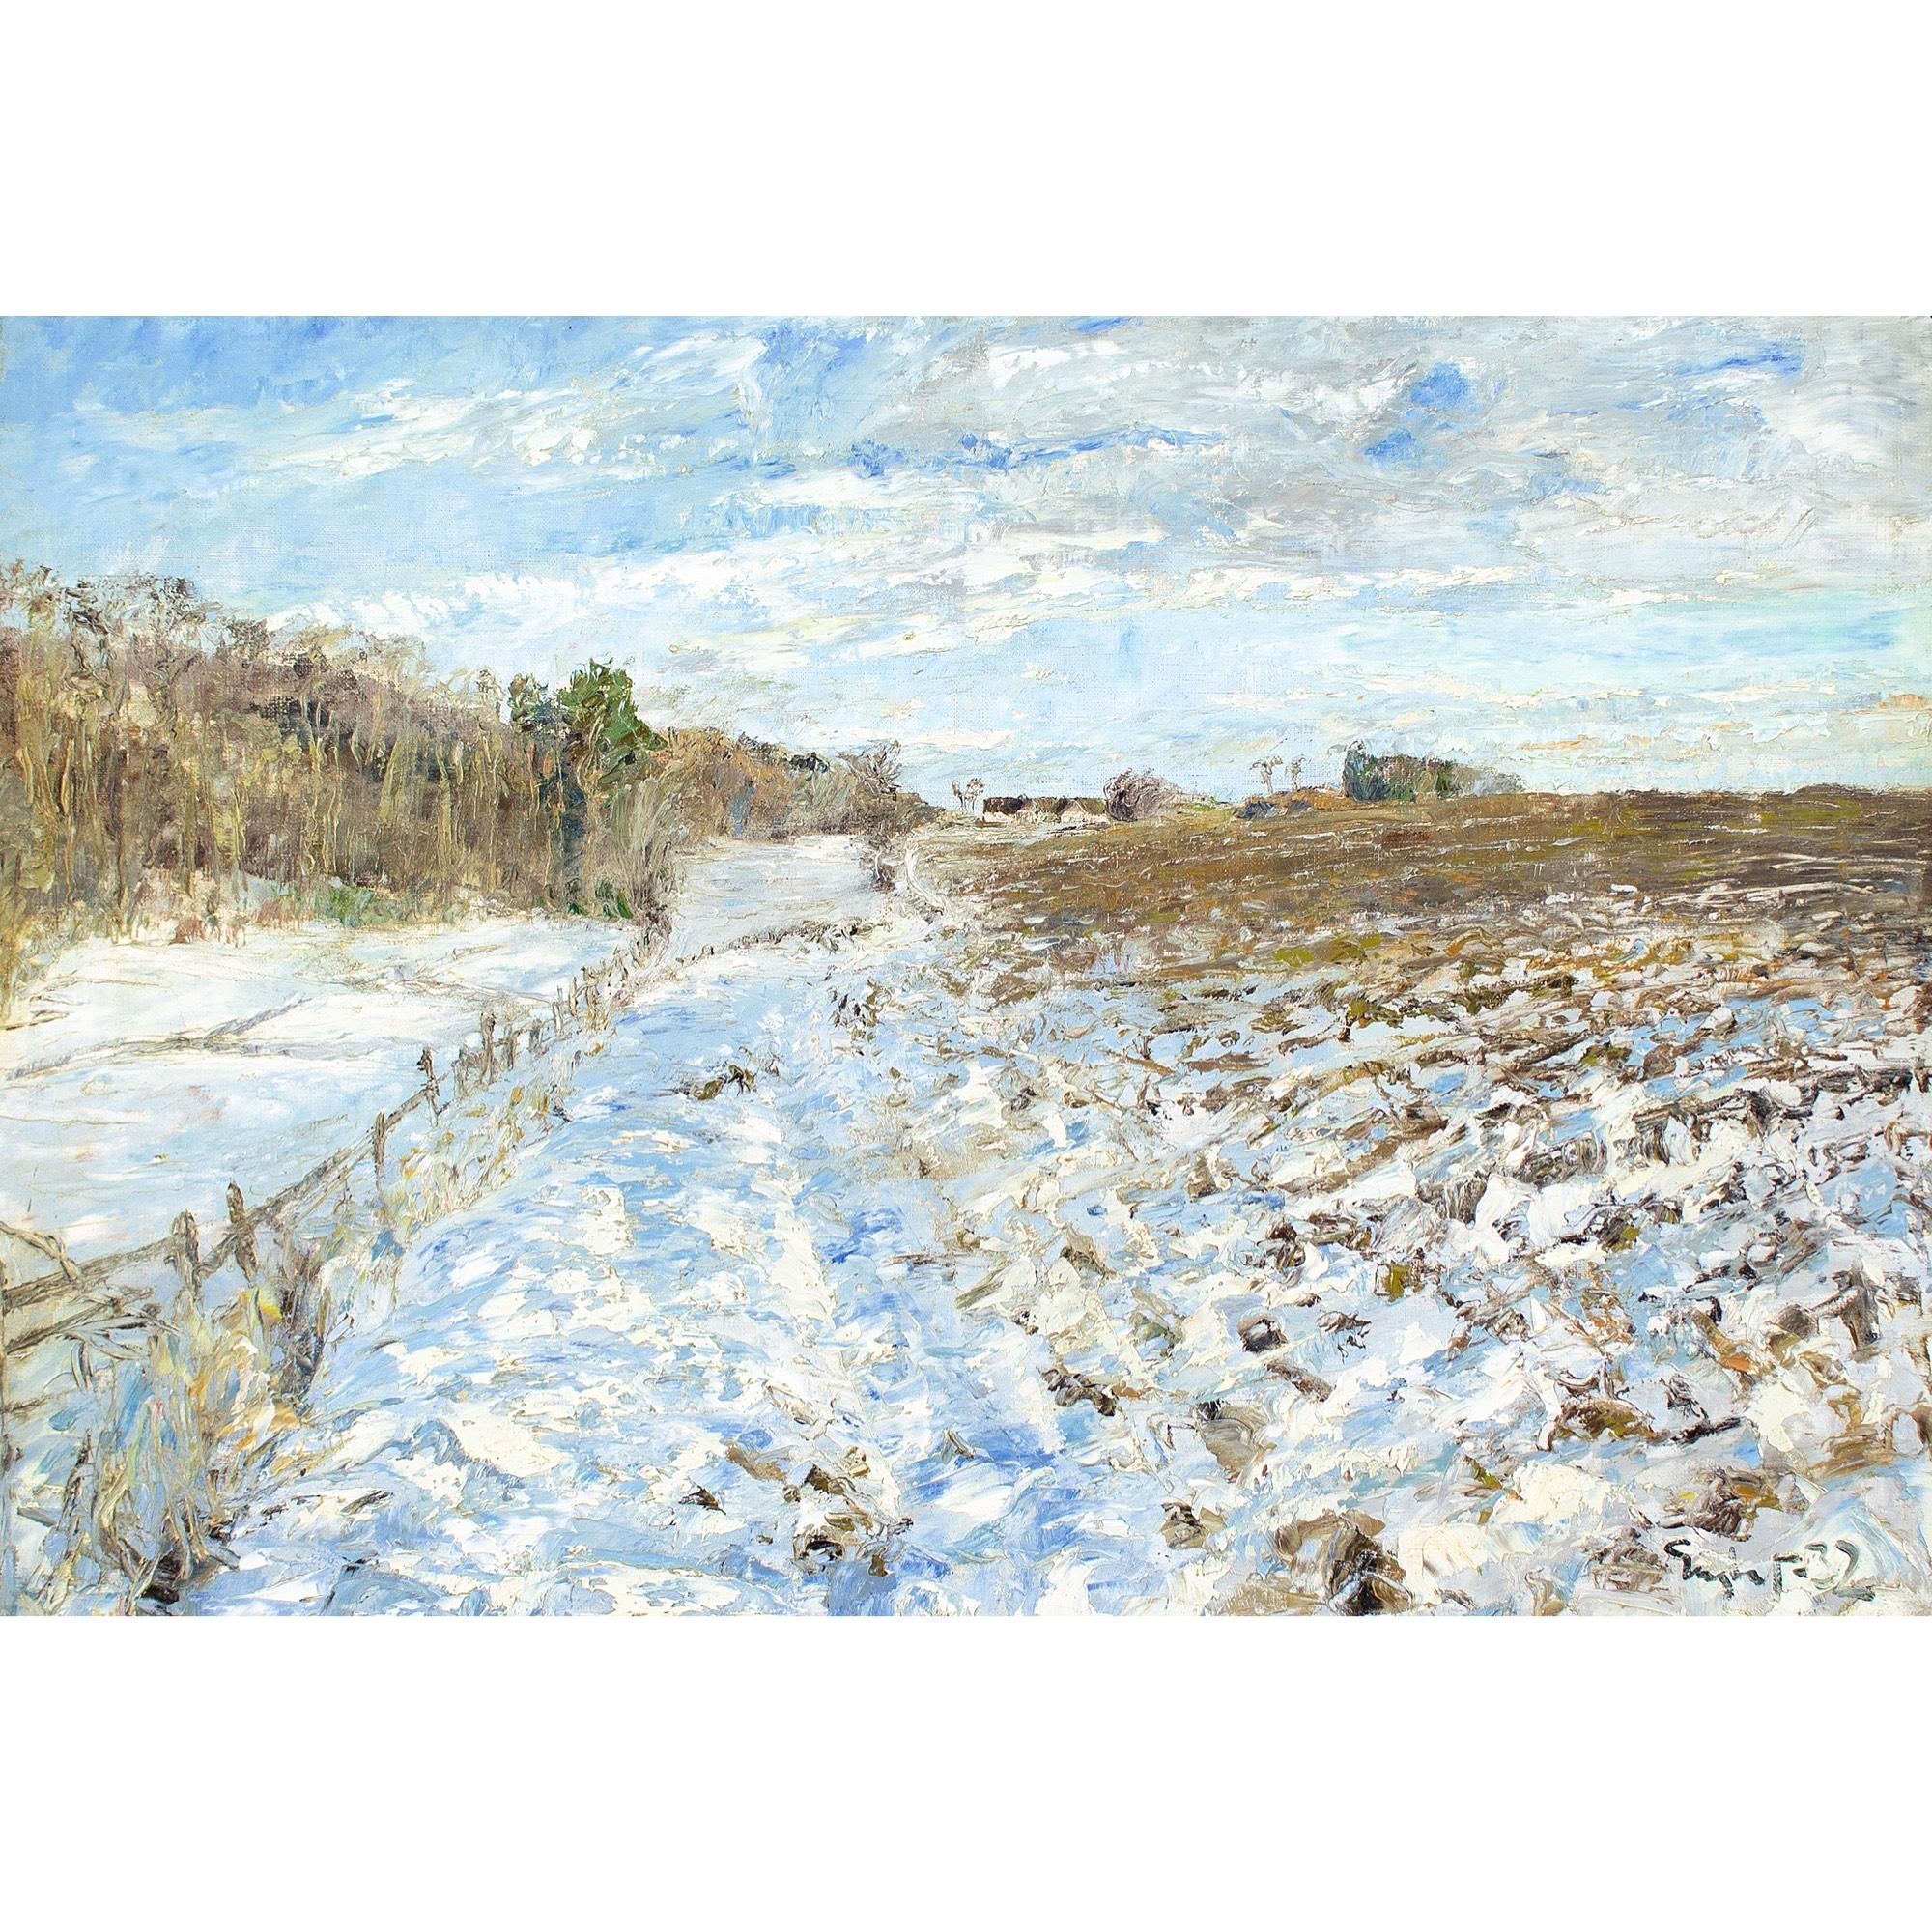 This impressionistic early 20th-century Danish oil painting depicts a snow-covered landscape with track.

The dazzling effects of light hitting snow rendered by an experienced hand. When boots sink through into muddy earth and punctuate a blanket of